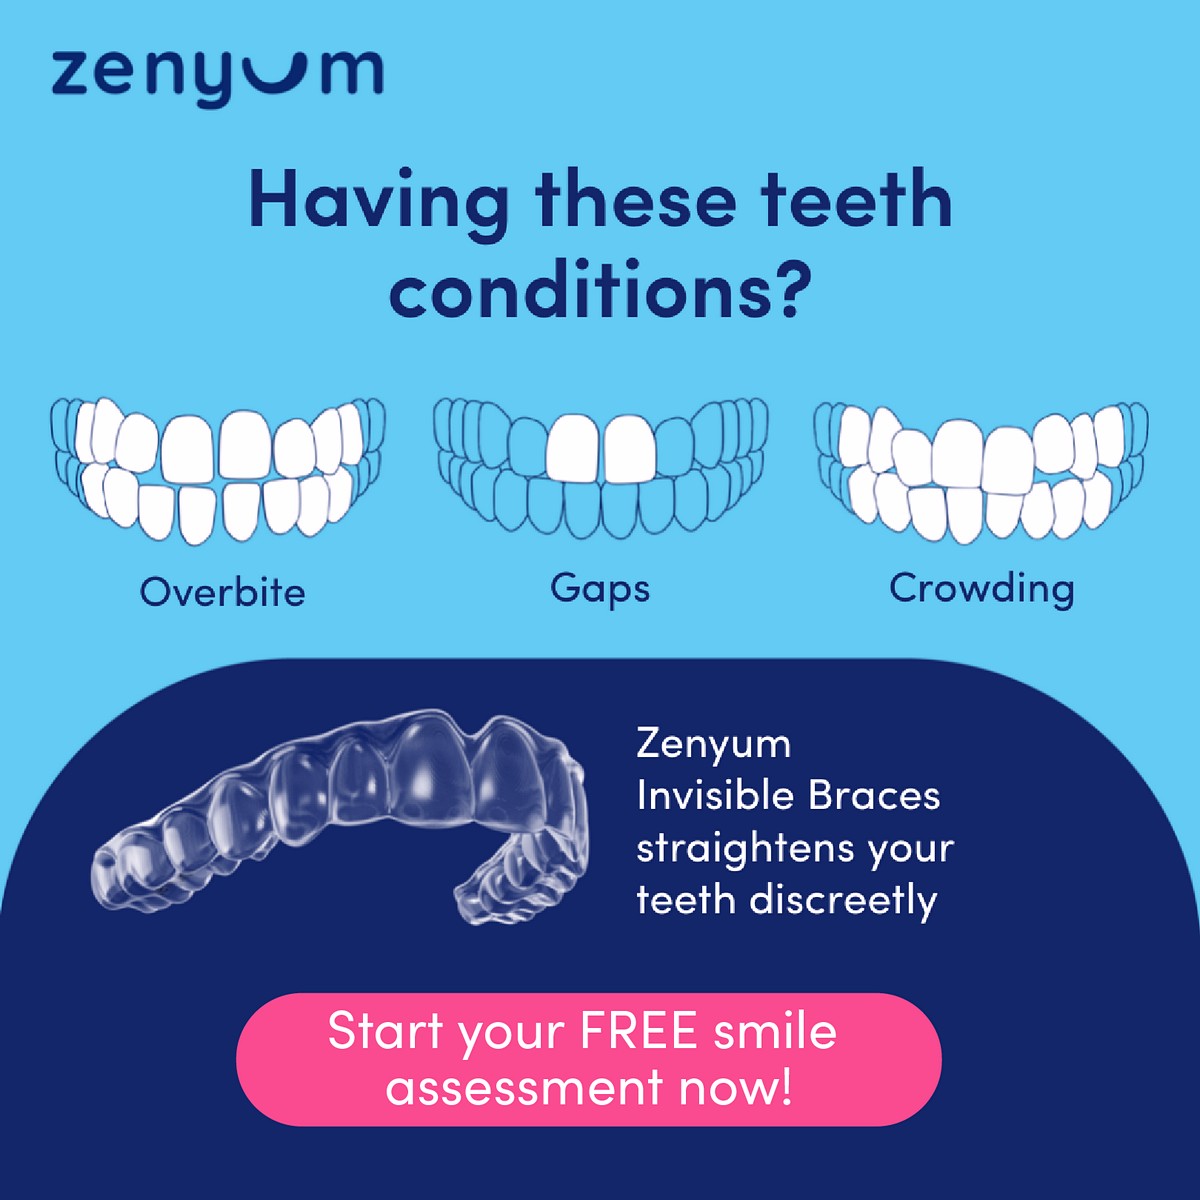 SGMY_EN_1080x1080_Having-teeth-conditions Now till 31 Aug 2022: Free Smile Assessment with Extra Discounts on Zenyum Invisible Braces